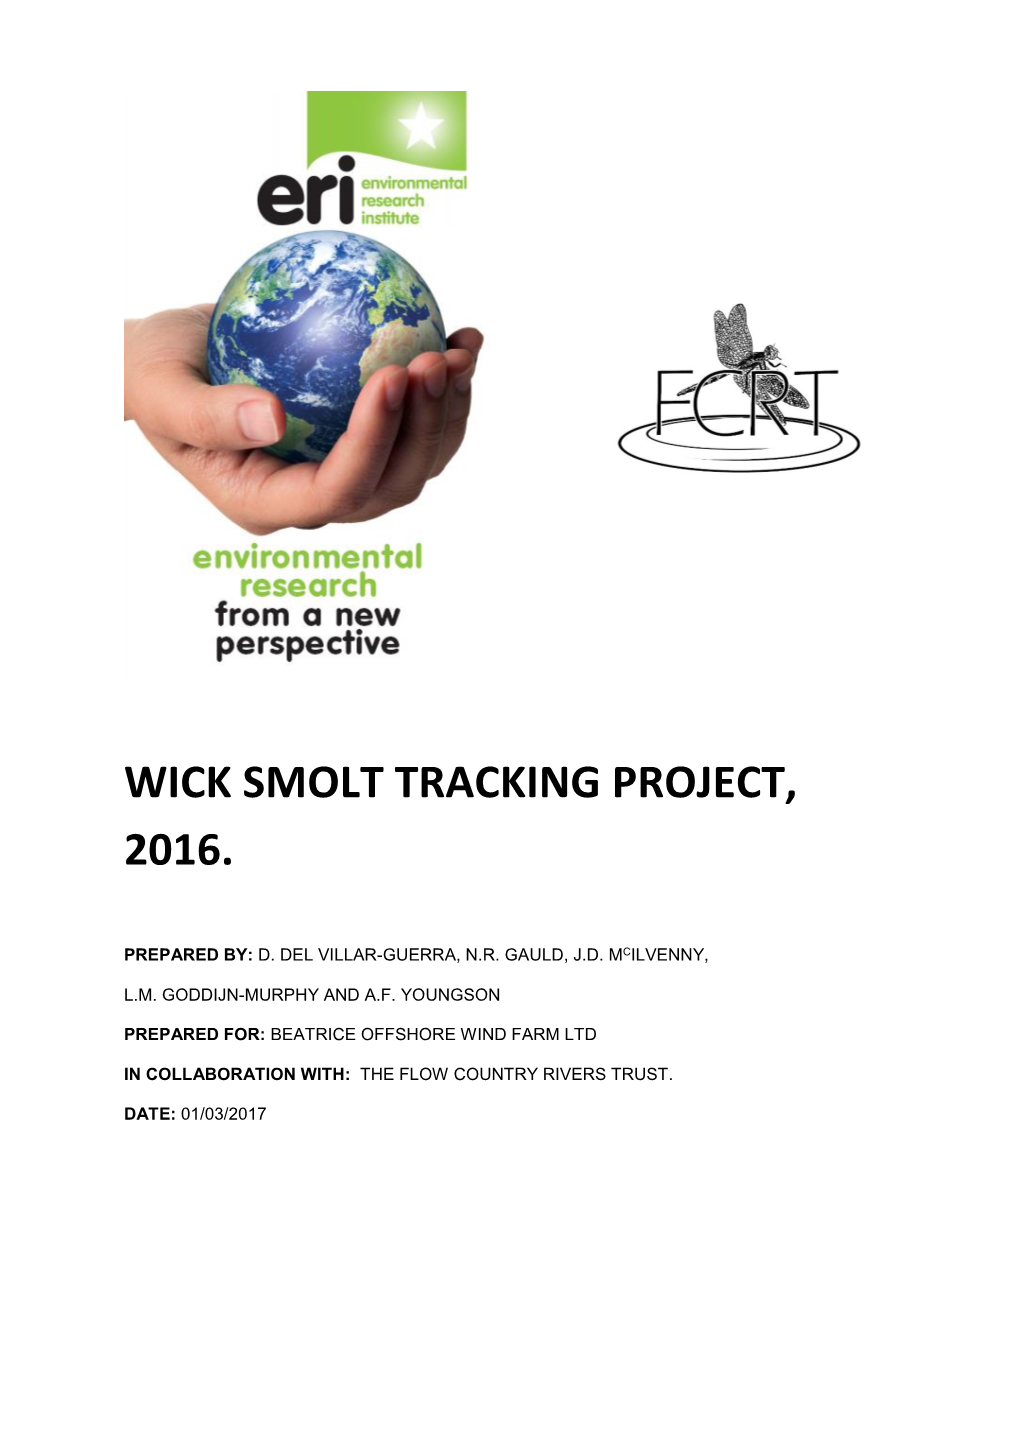 Wick Smolt Tracking Project, 2016